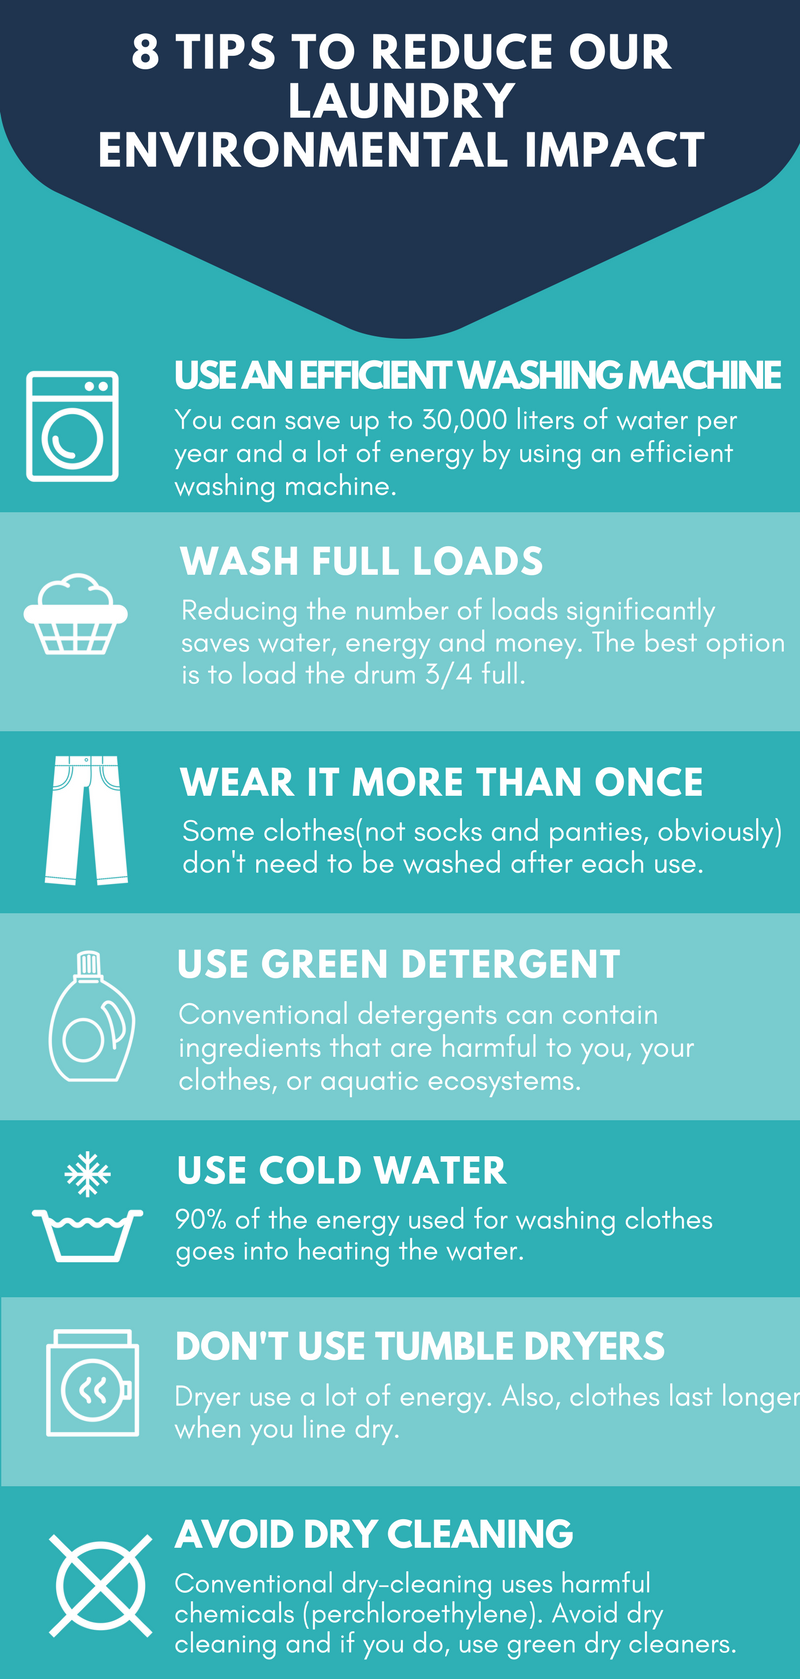 Our Clothes Are Polluting the Environment. Here's a Solution